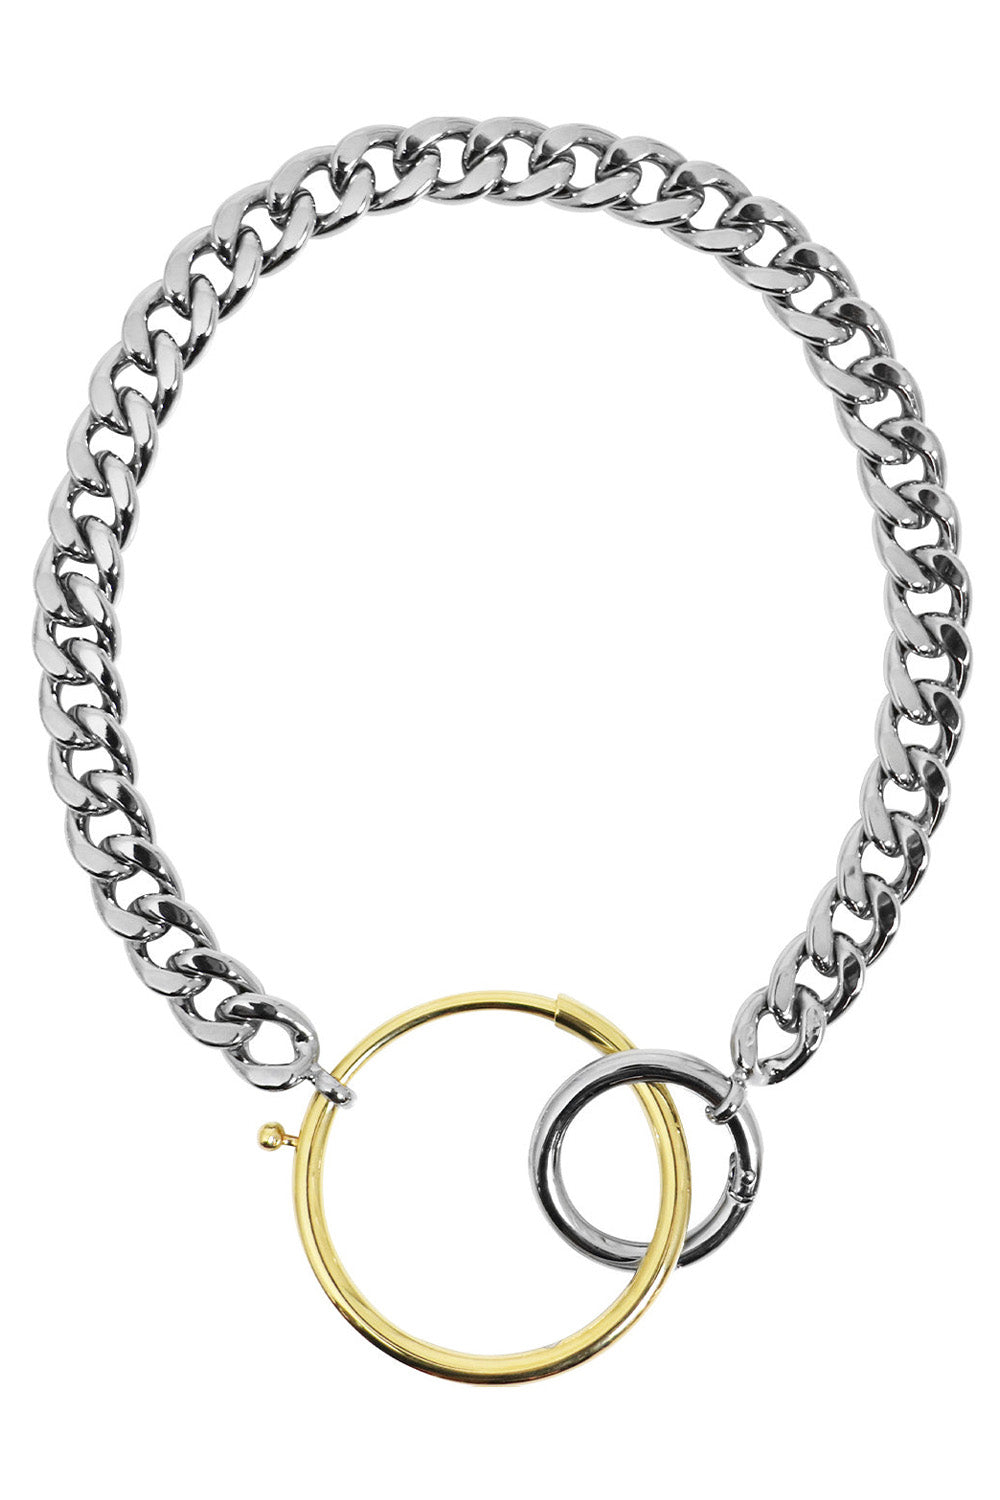 MAISON MARGIELA JEWELERY SILVER CHUNKY CONTRAST CIRCLE NECKLACE SILVER